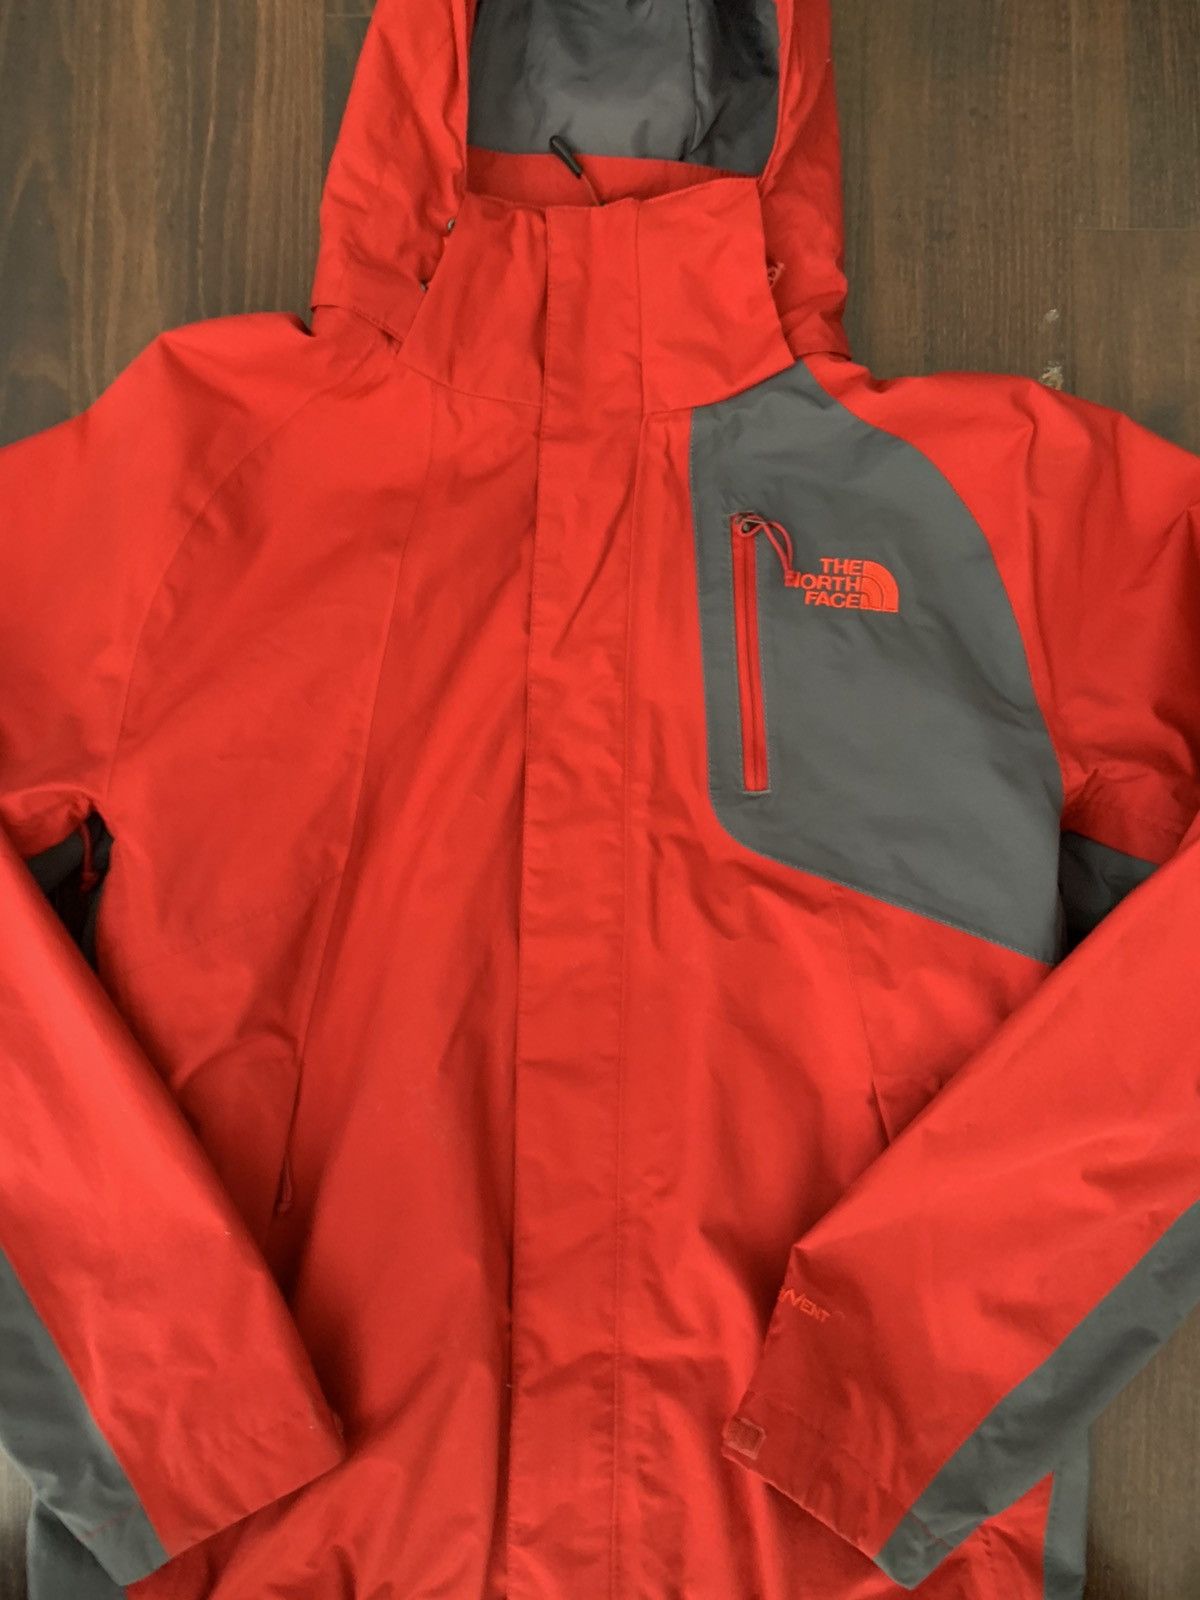 Vintage Red North Face Coat Size US S / EU 44-46 / 1 - 2 Preview